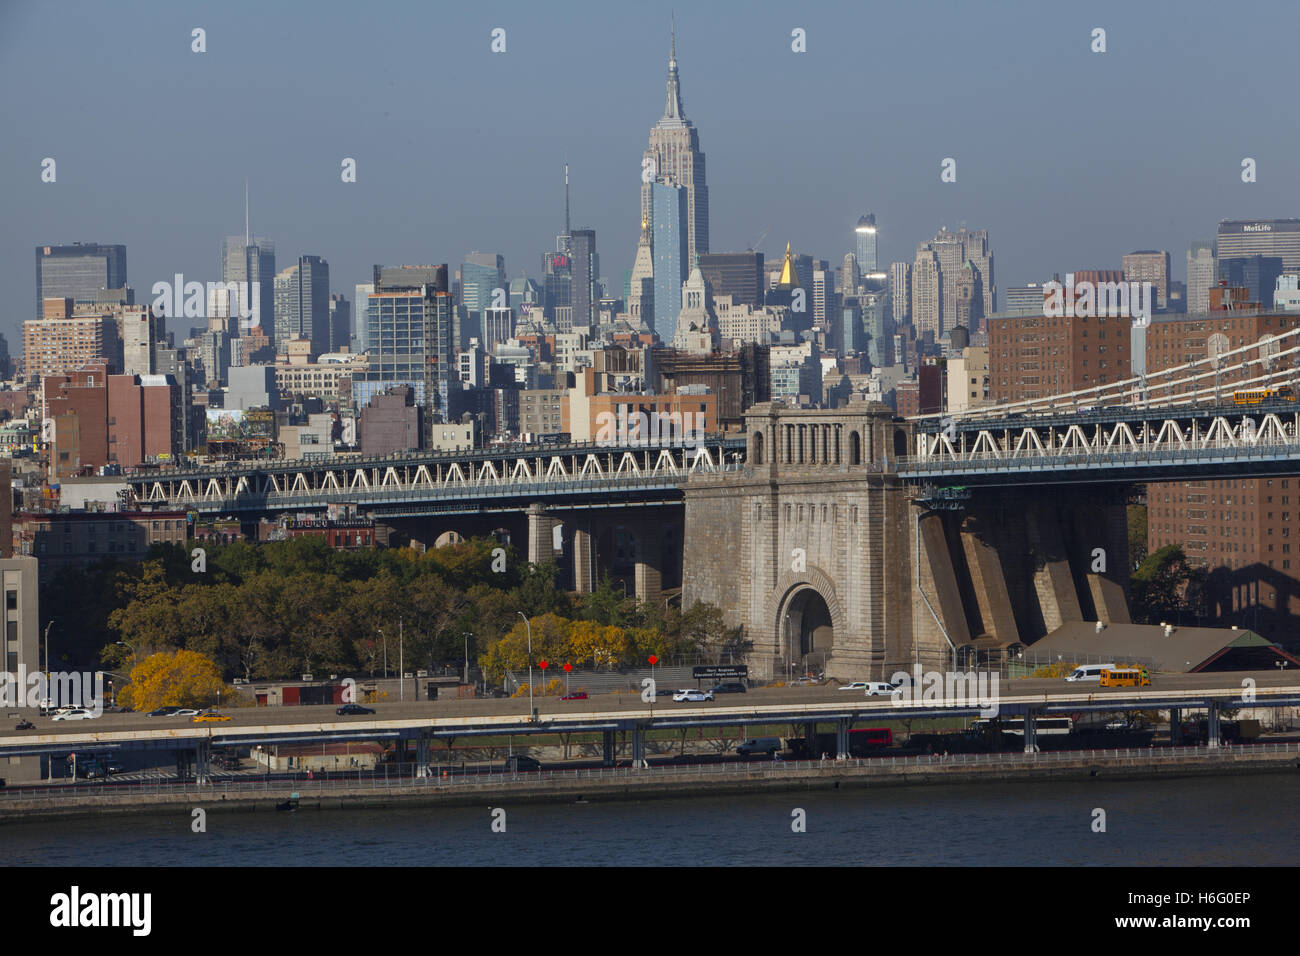 Manhattan Bridge in the foreground, looking north into midtown across the East River from the Brooklyn Bridge. Stock Photo